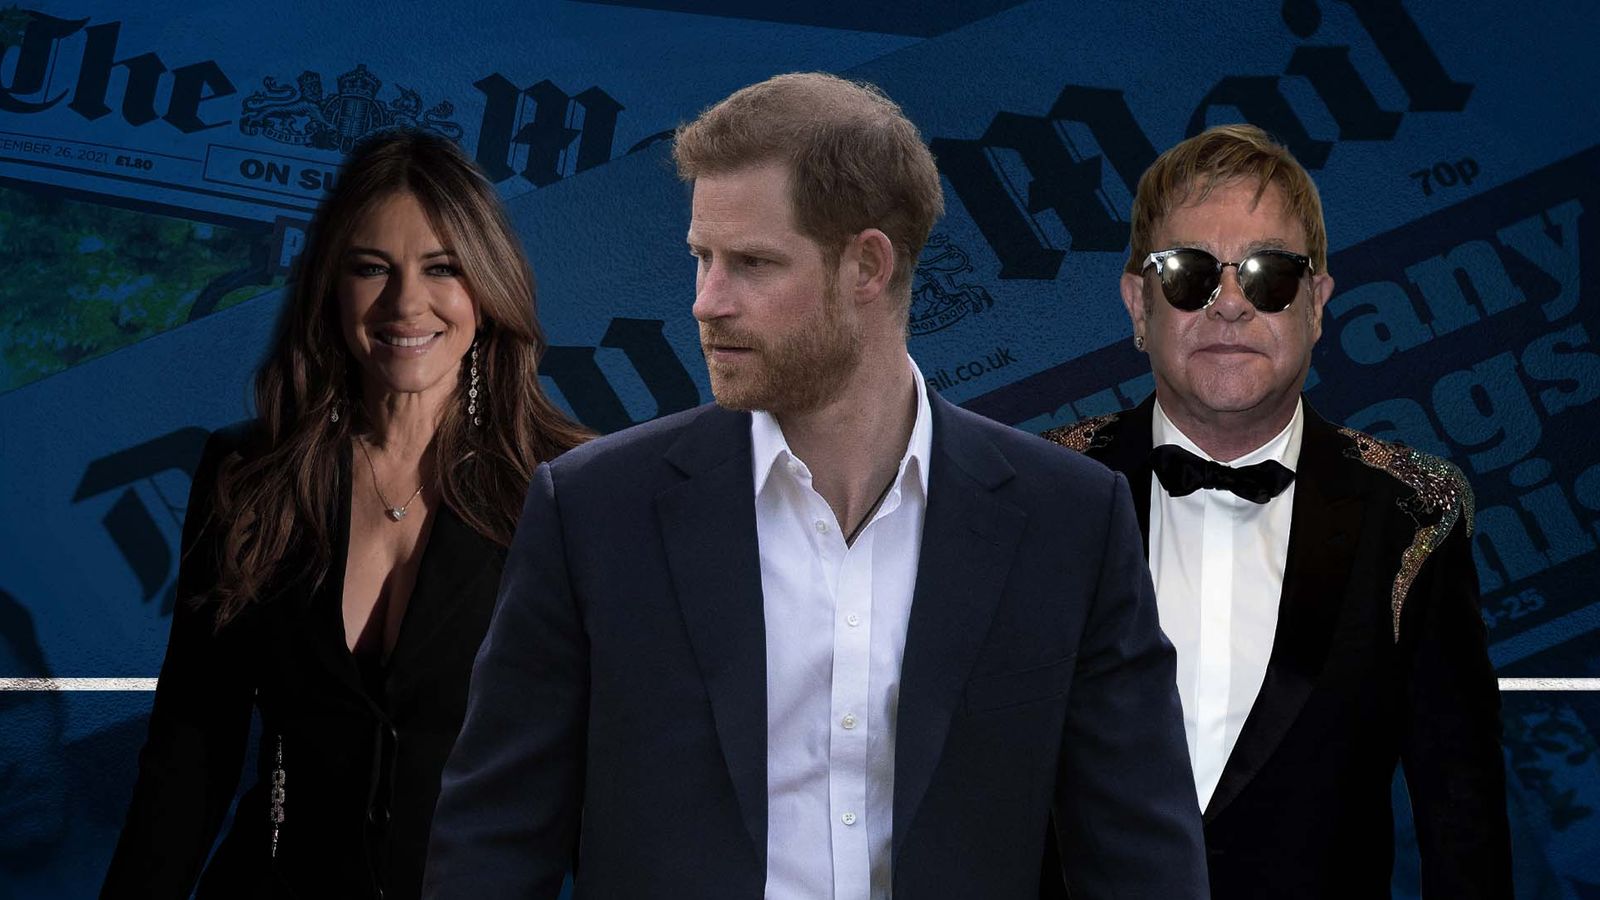 Prince Harry v Associated Newspapers: Everything you need to know about the Duke of Sussex’s latest court case